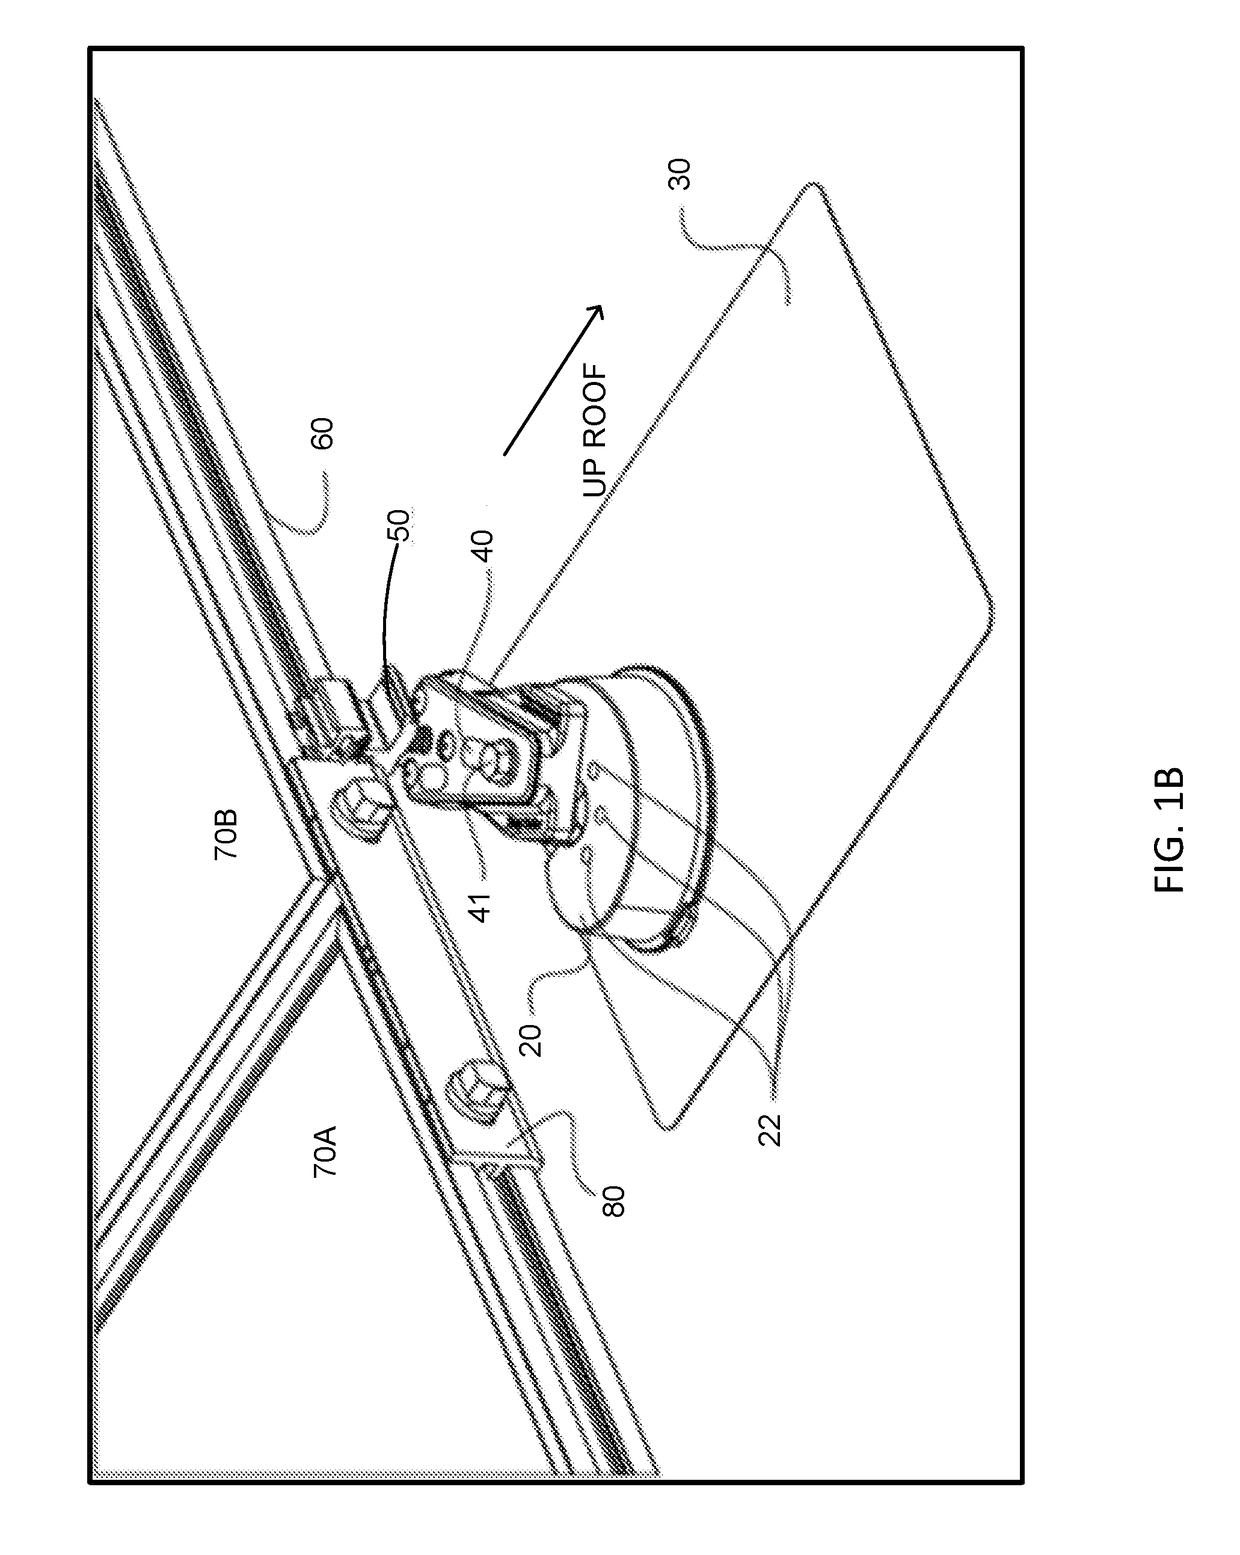 Photovoltaic mounting system with sealant injector inlet